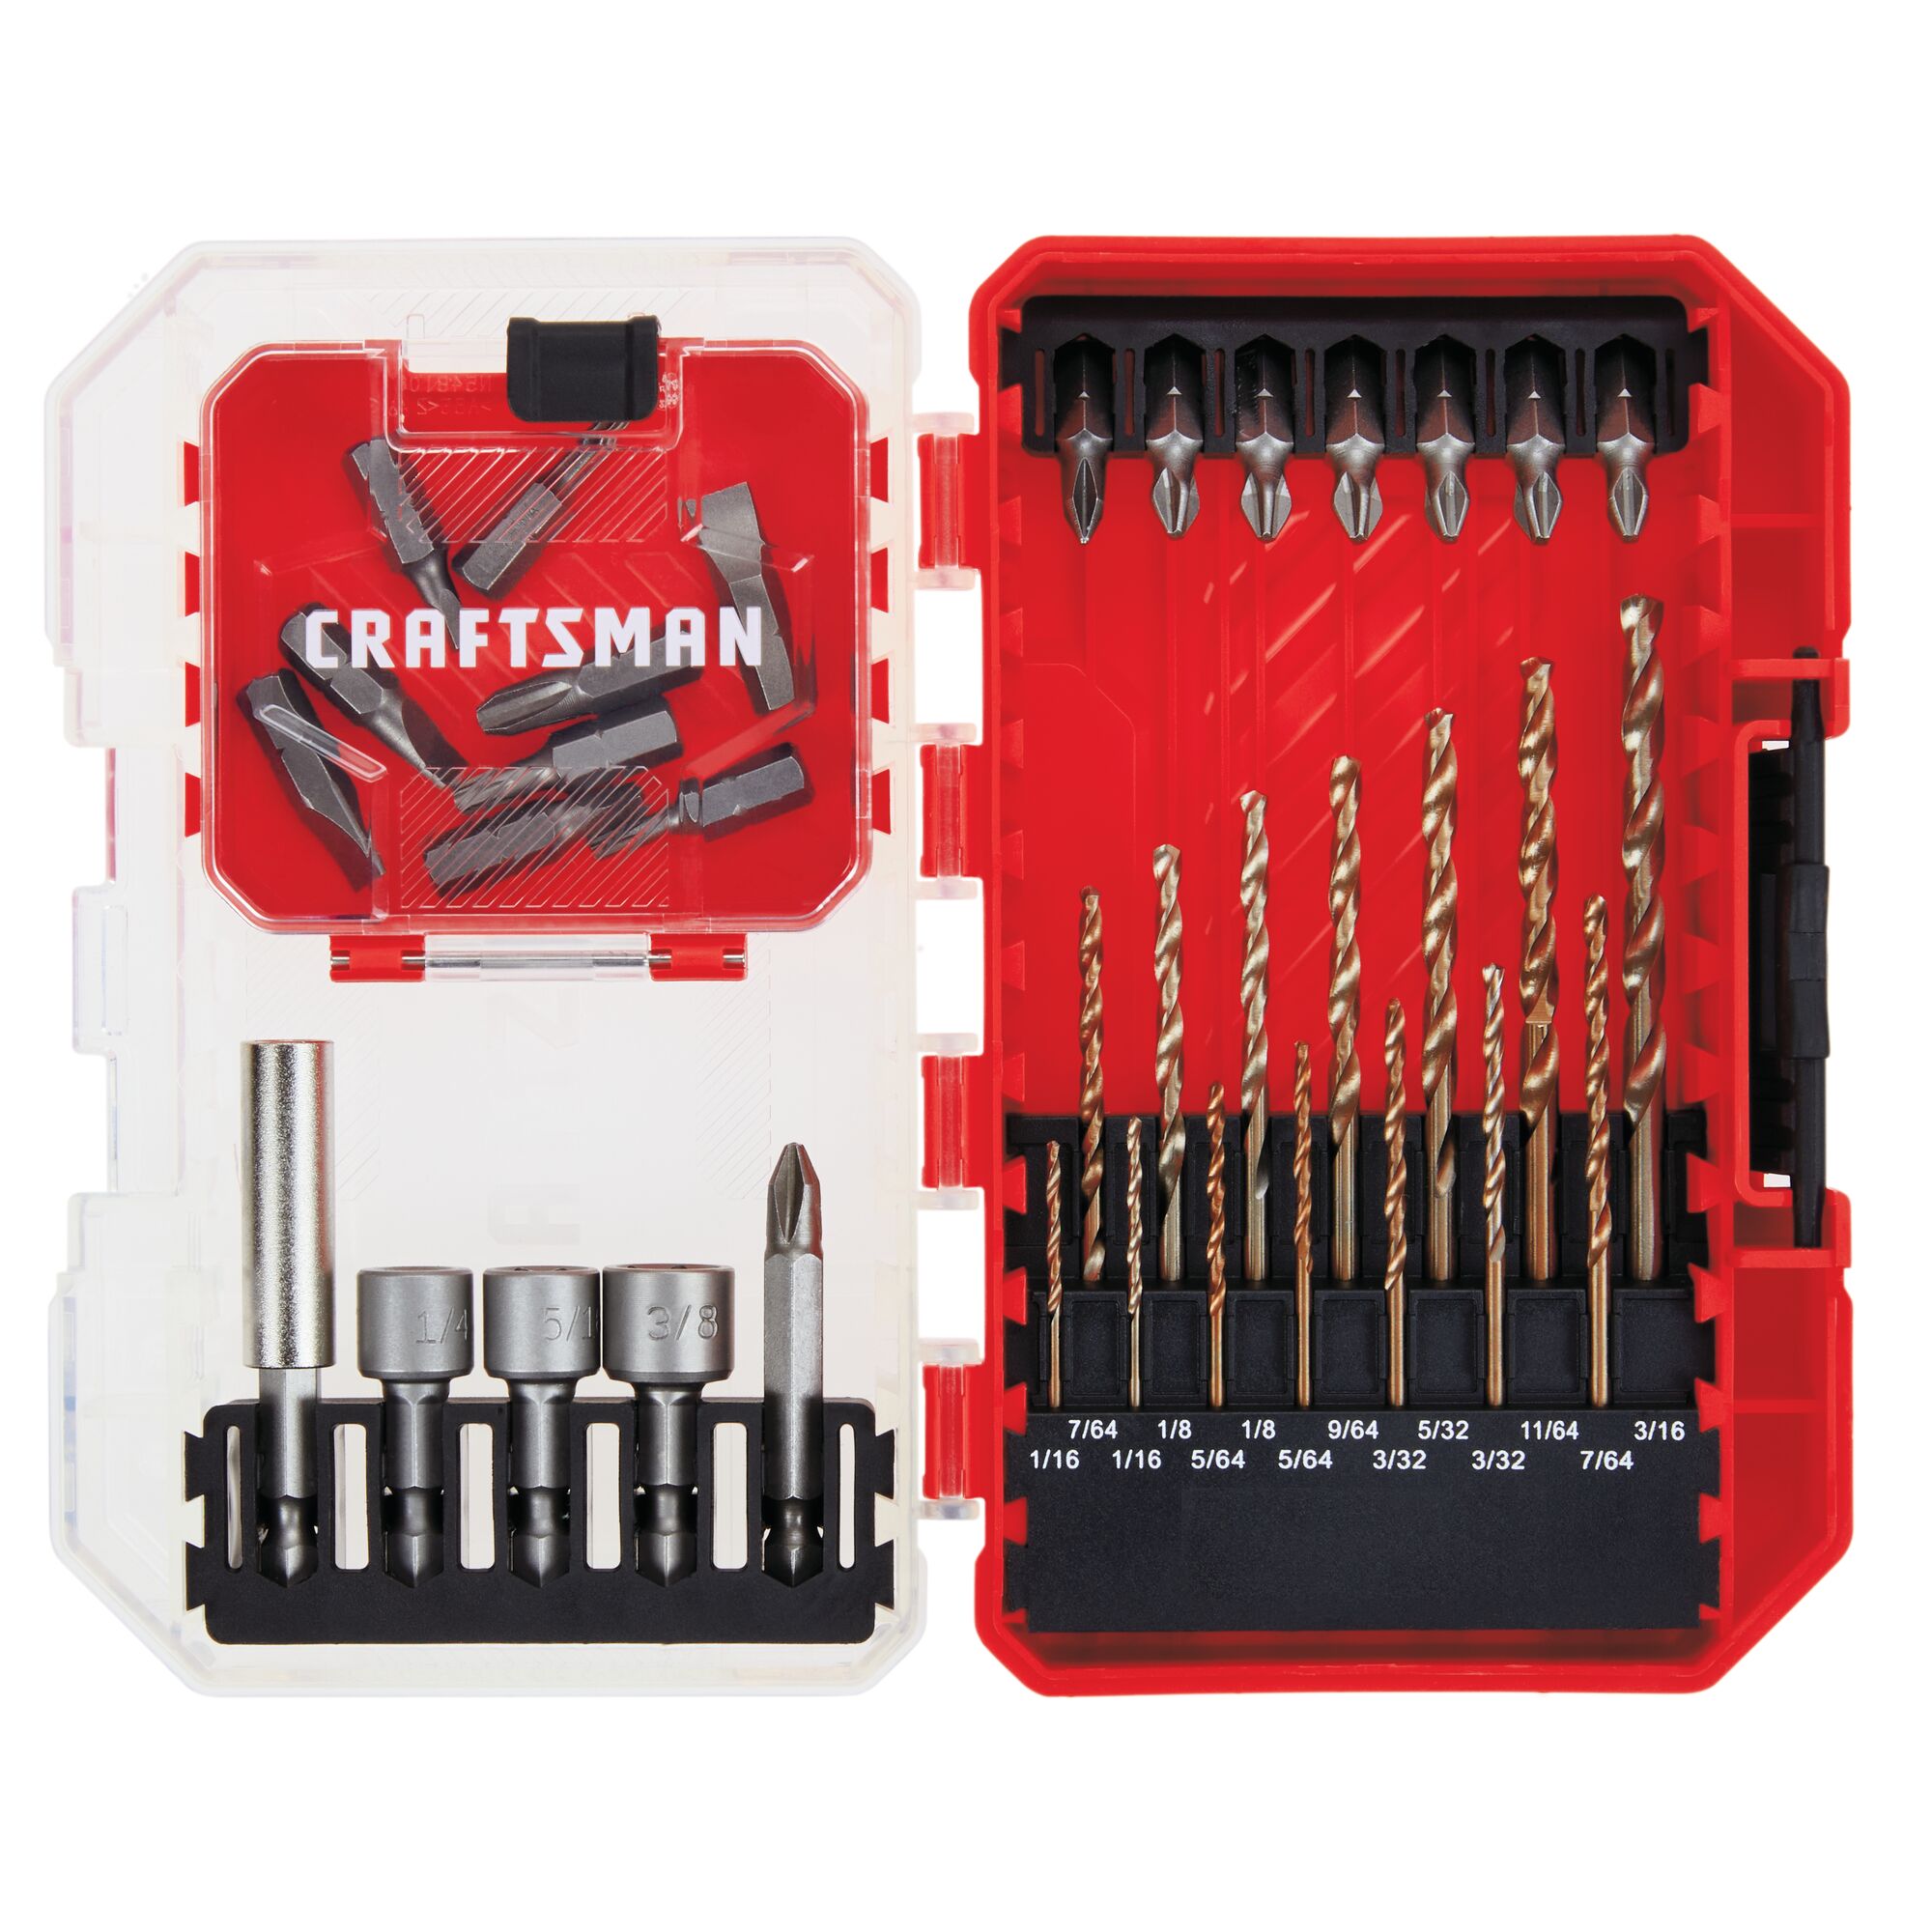 View of CRAFTSMAN Drill Bits: Set on white background